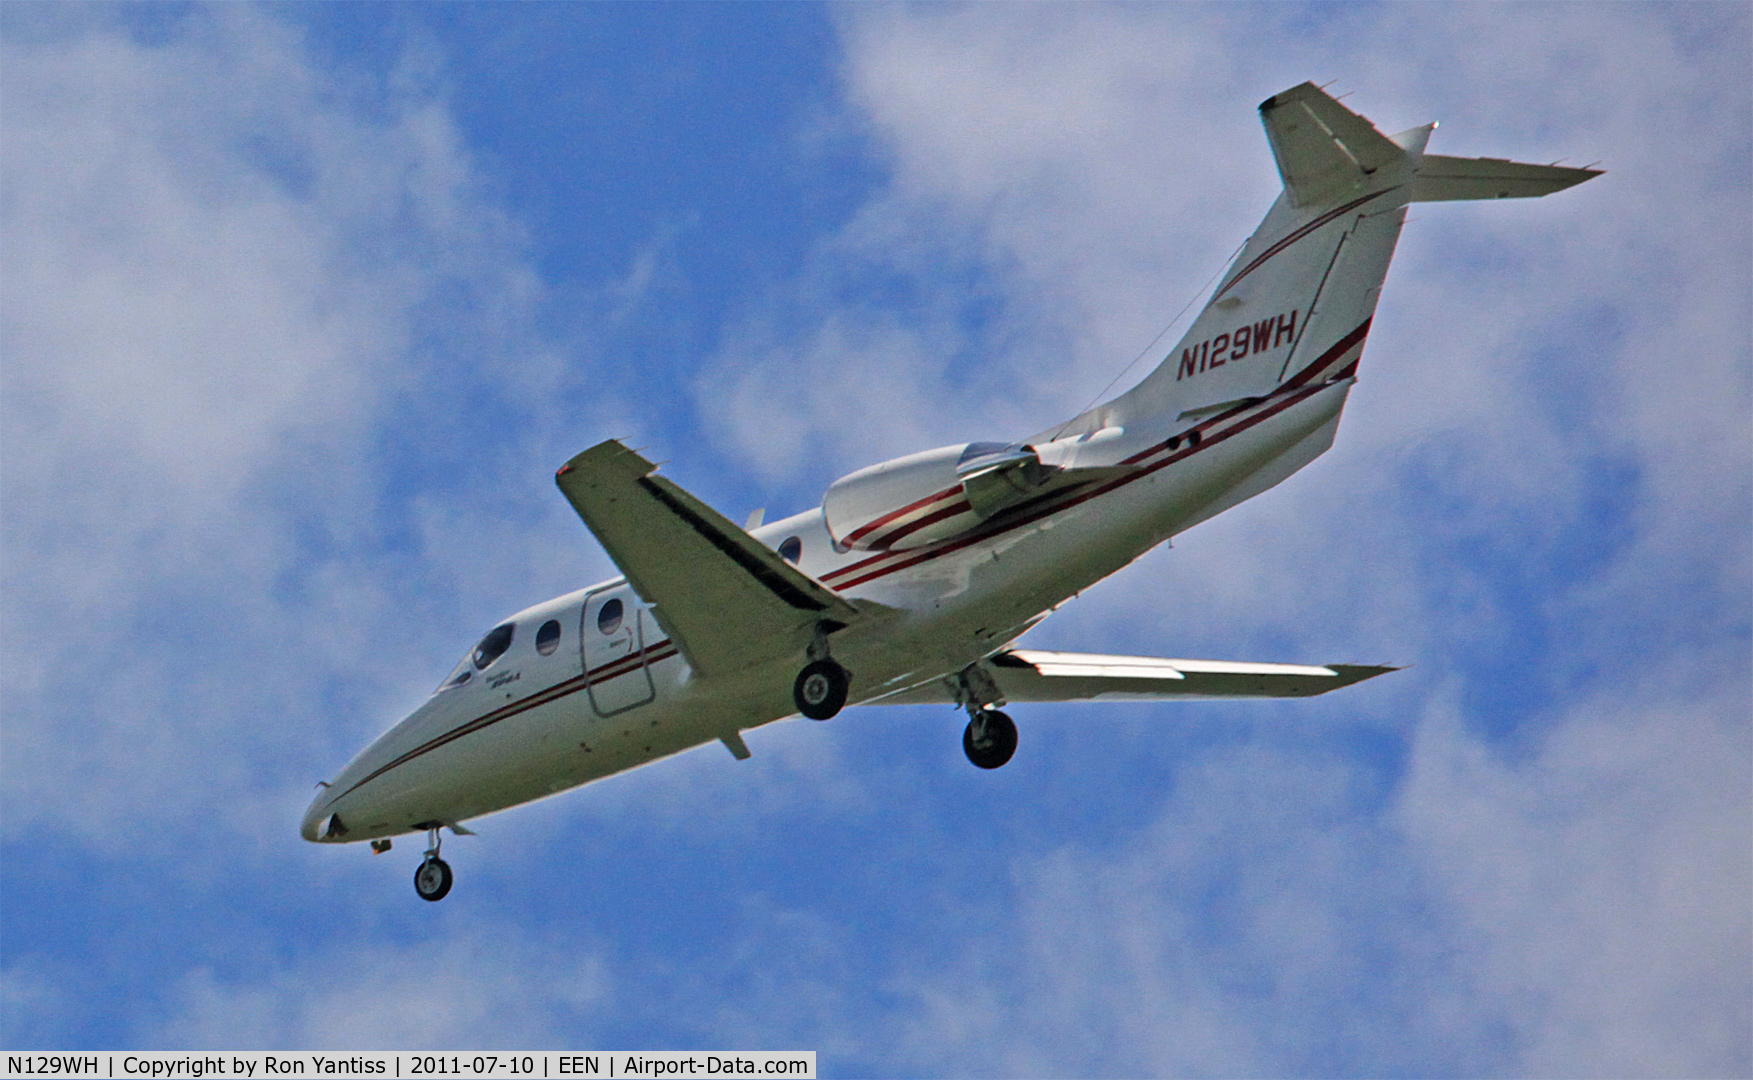 N129WH, 1996 Raytheon Aircraft Company 400A C/N RK-129, Tight turn on final approach to Keene, NH